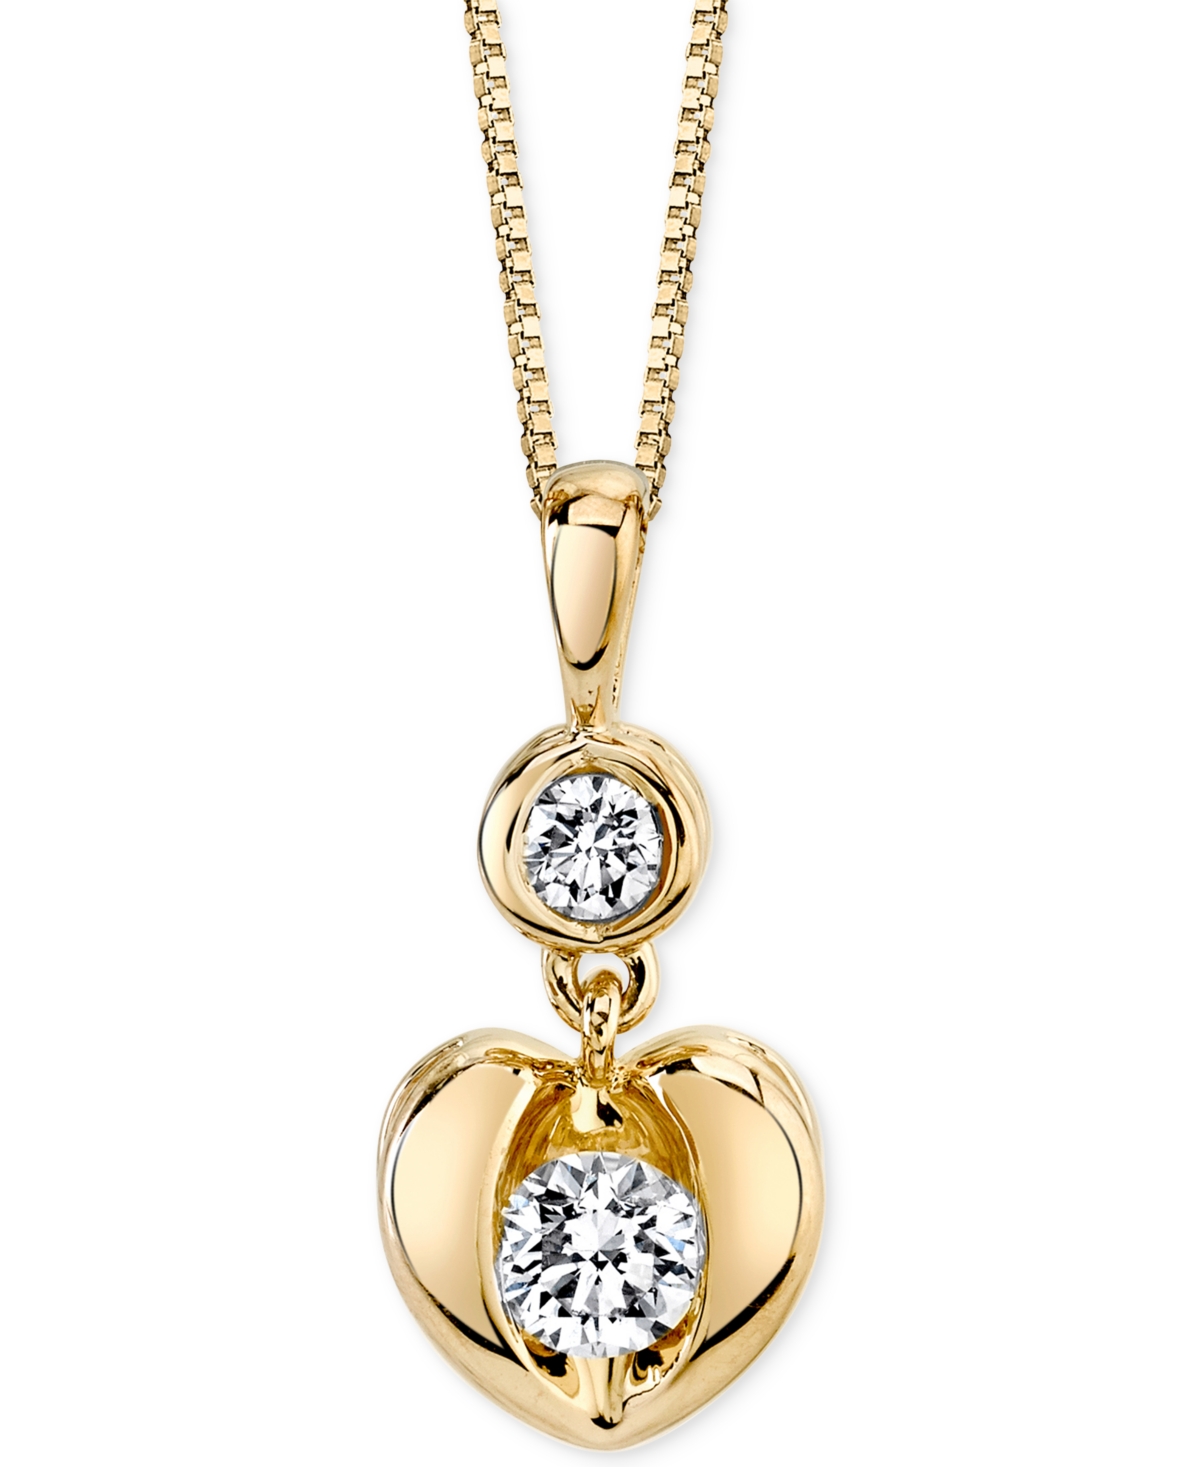 Sirena Energy Diamond Heart Pendant Necklace in 14k White or Yellow Gold (1/4 ct. t.w.) - Yellow Gold